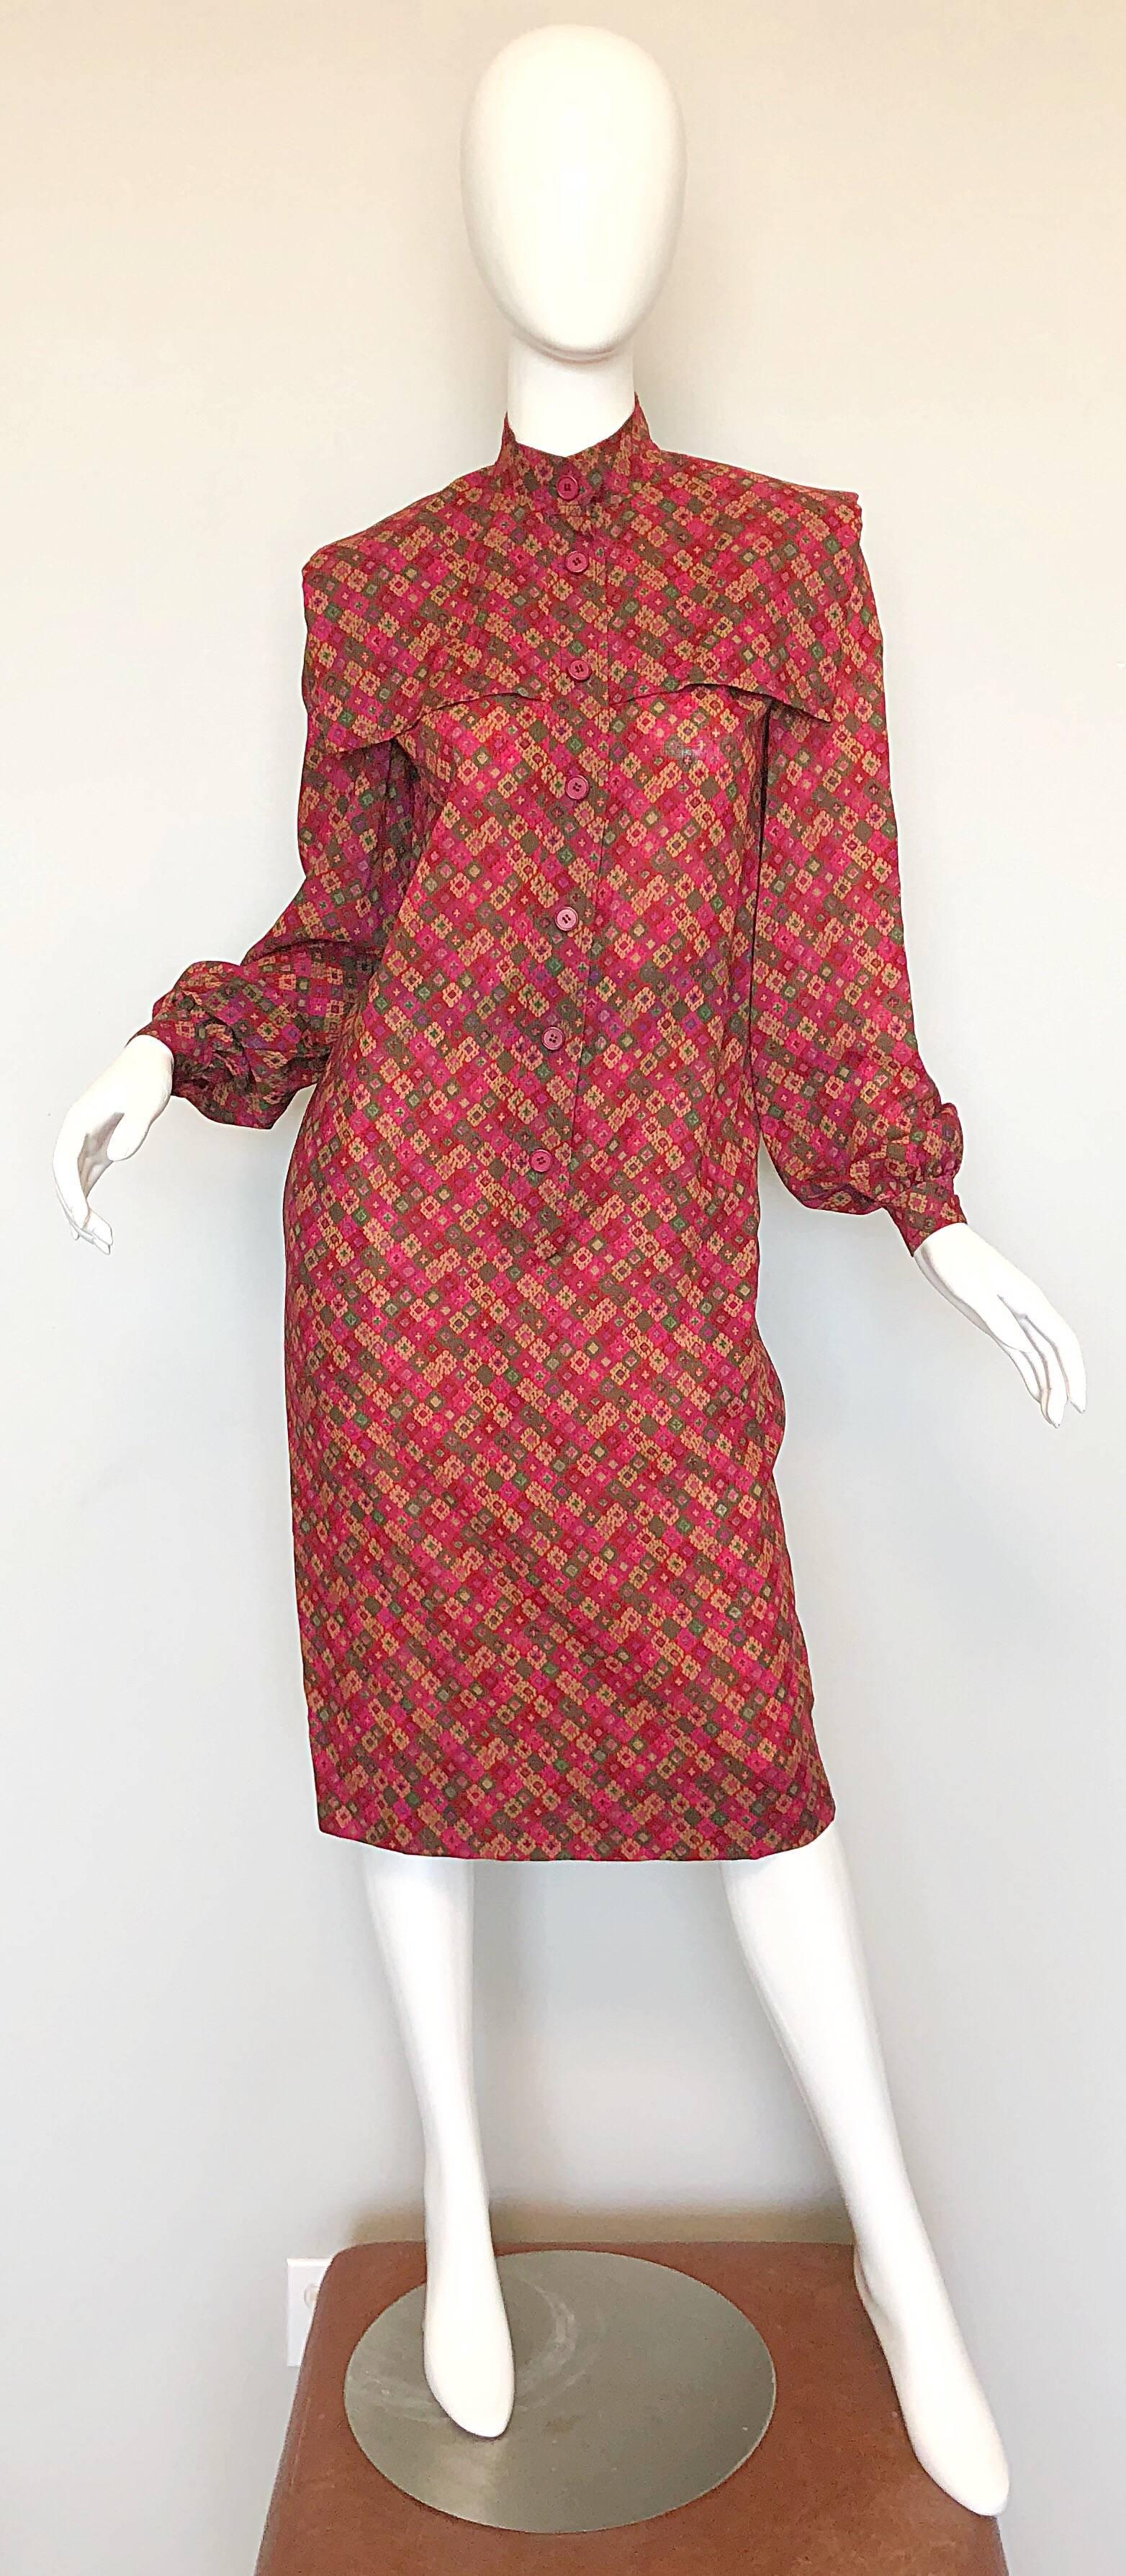 Vintage Givenchy 1980s Mosaic Tile Print Pink + Green Lightweight Wool Sac Dress In Excellent Condition For Sale In San Diego, CA